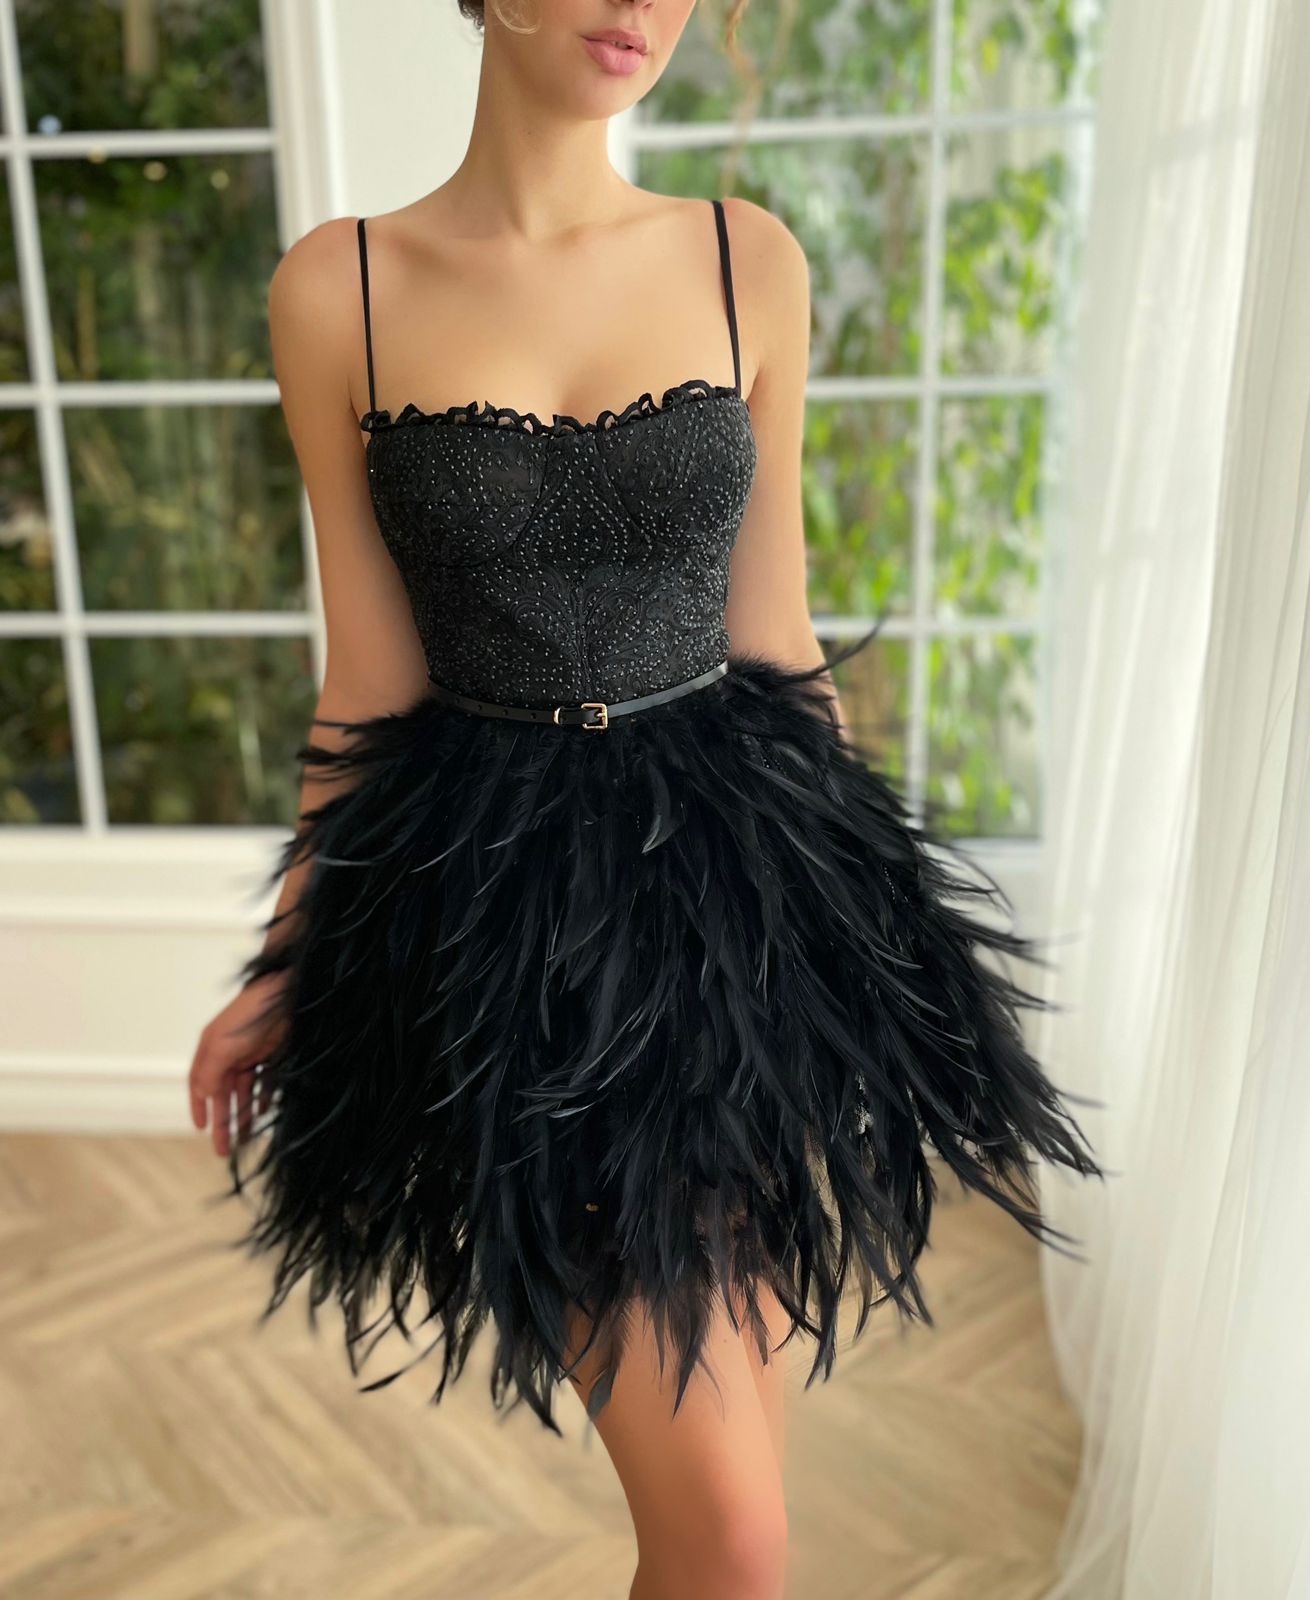 Black mini dress with spaghetti straps, belt and feathers